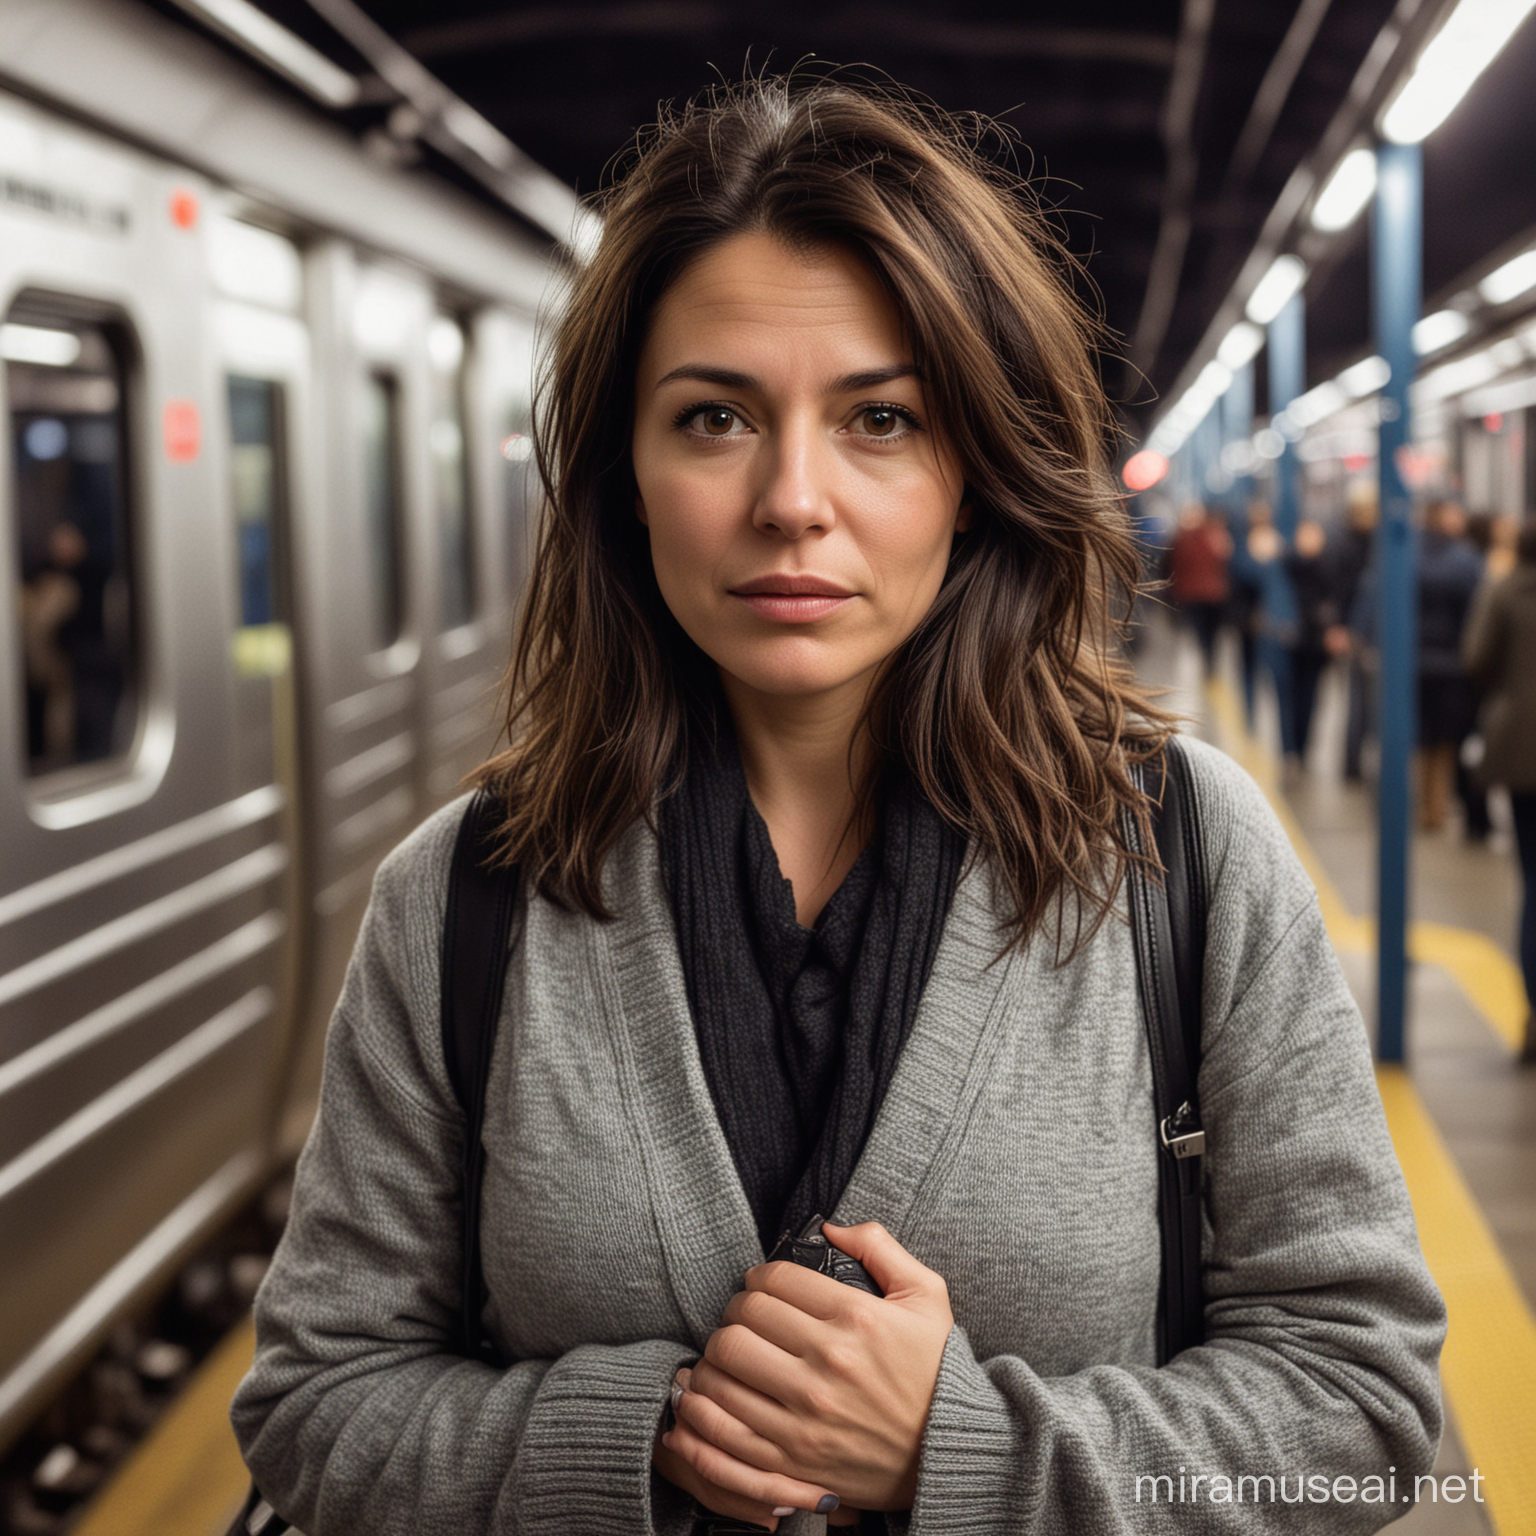 American woman, in the subways, of Kansas City, at night, waiting for train to come, she is 37 years old, dark brown hair, brown eyes, grey cardigan, carrying glossy black purse, worried facial expression